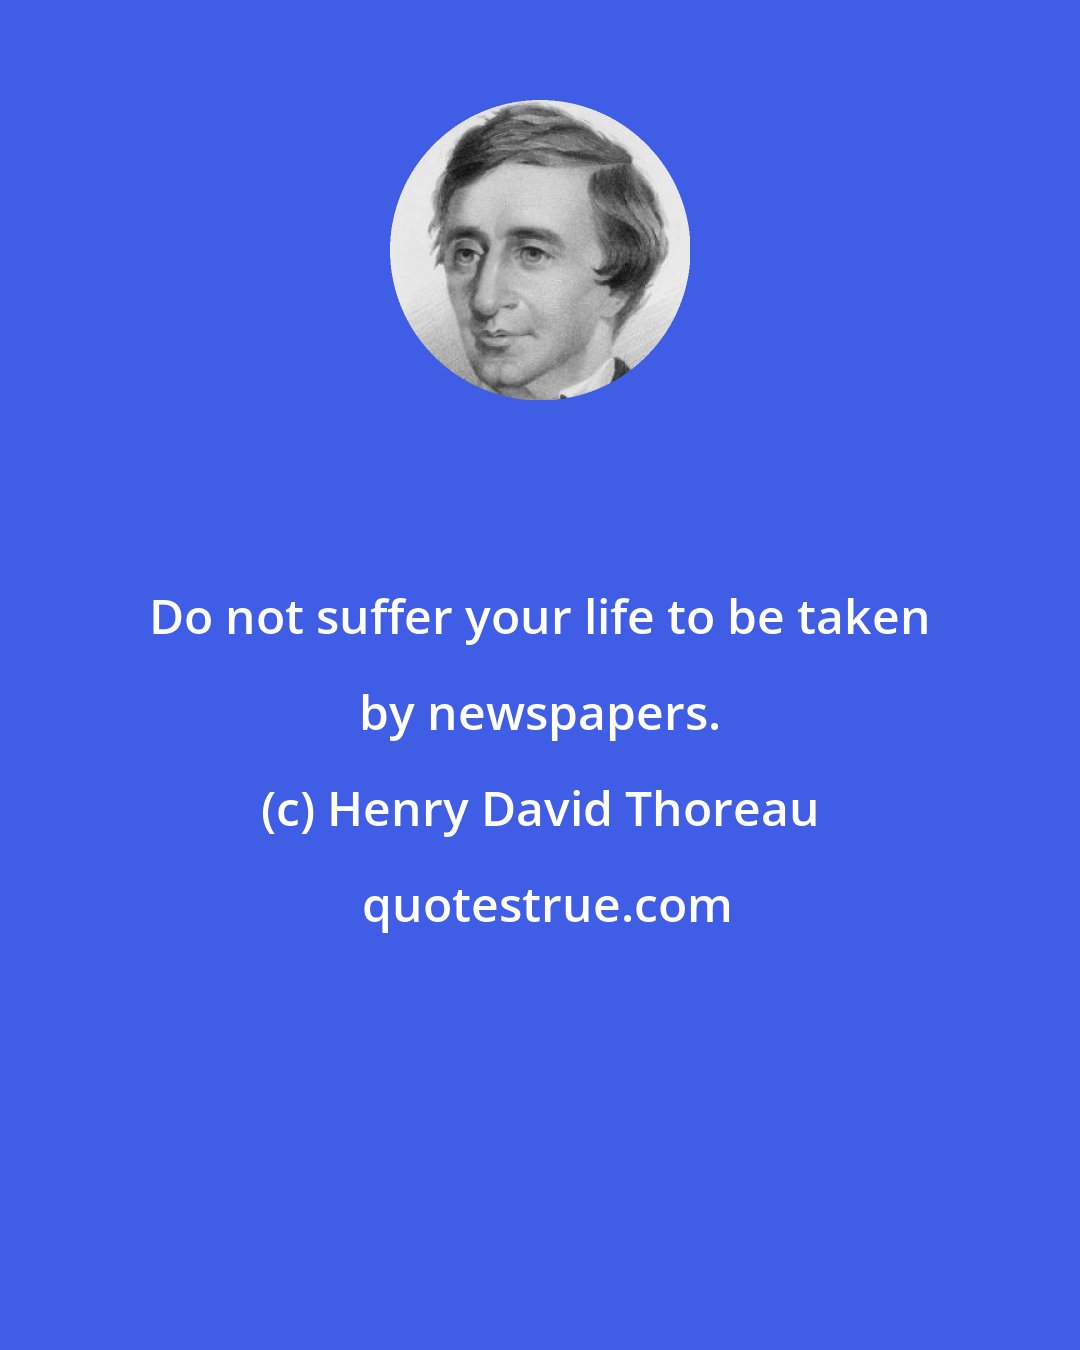 Henry David Thoreau: Do not suffer your life to be taken by newspapers.